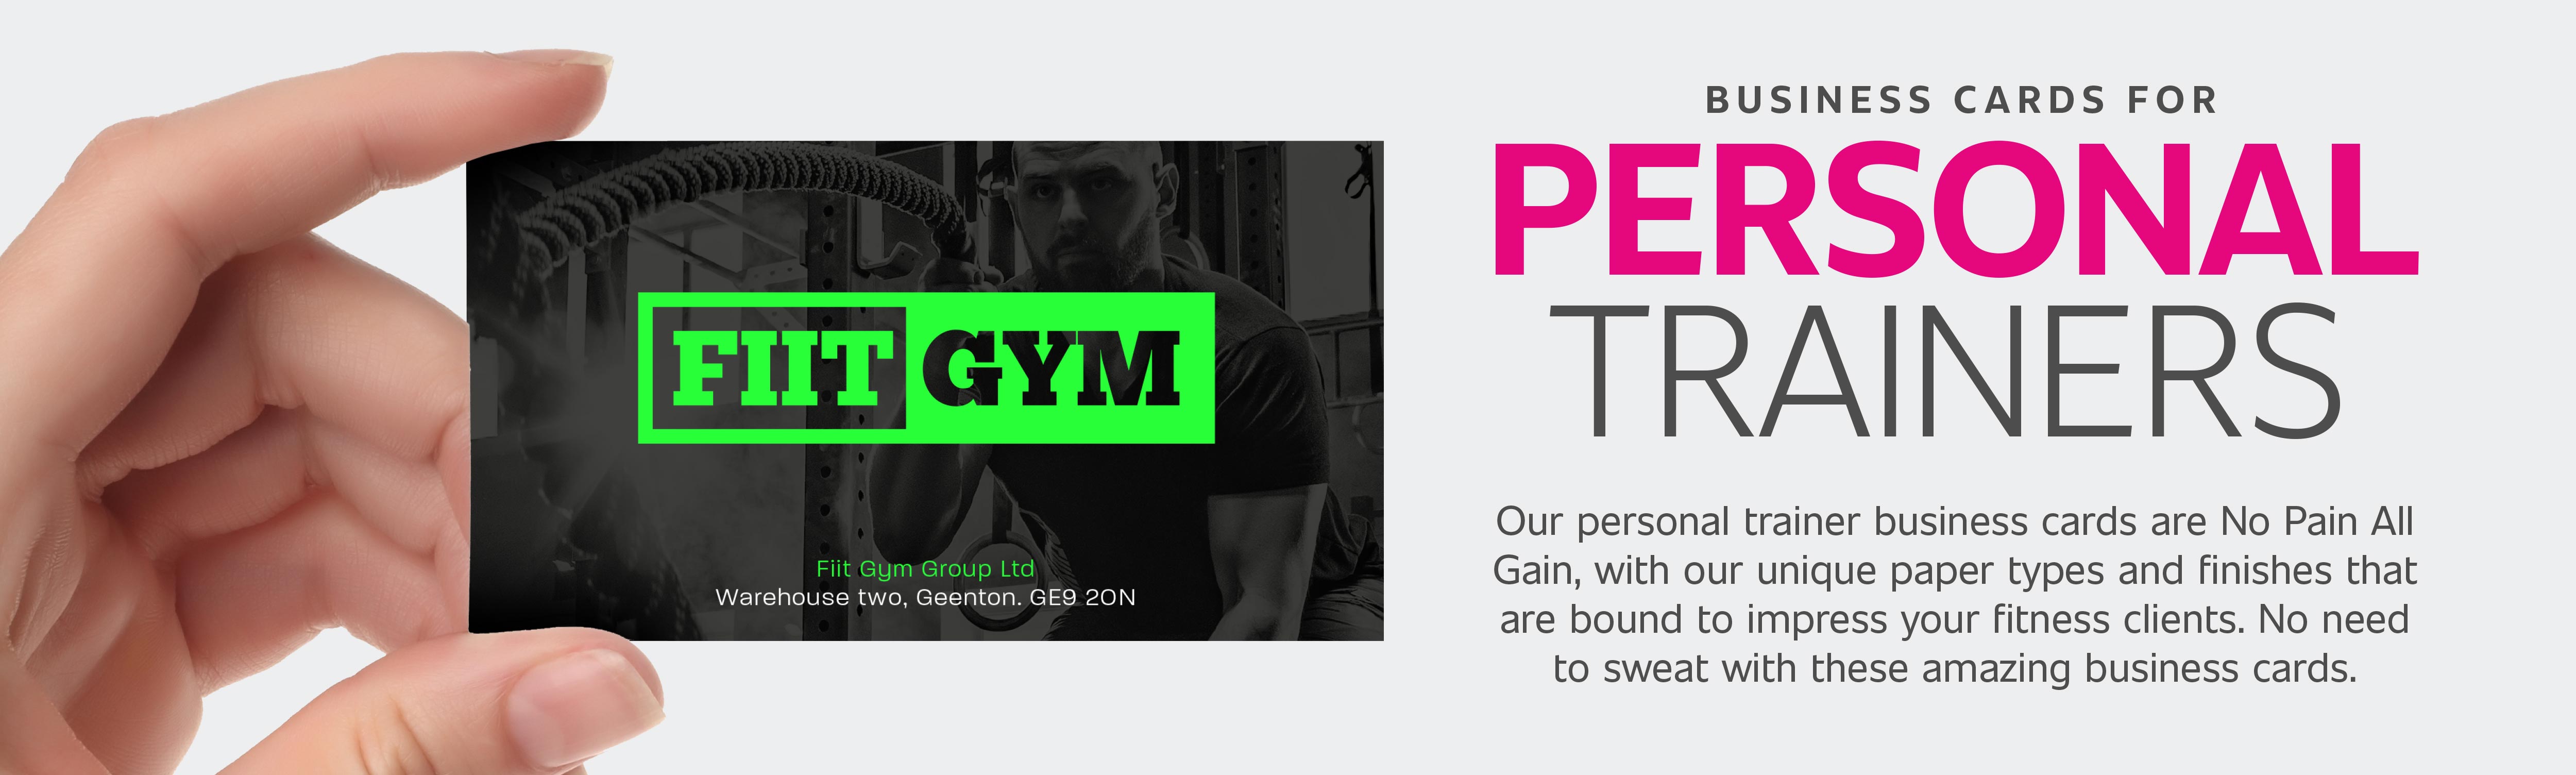 Personal Trainer Business Cards Header Banner